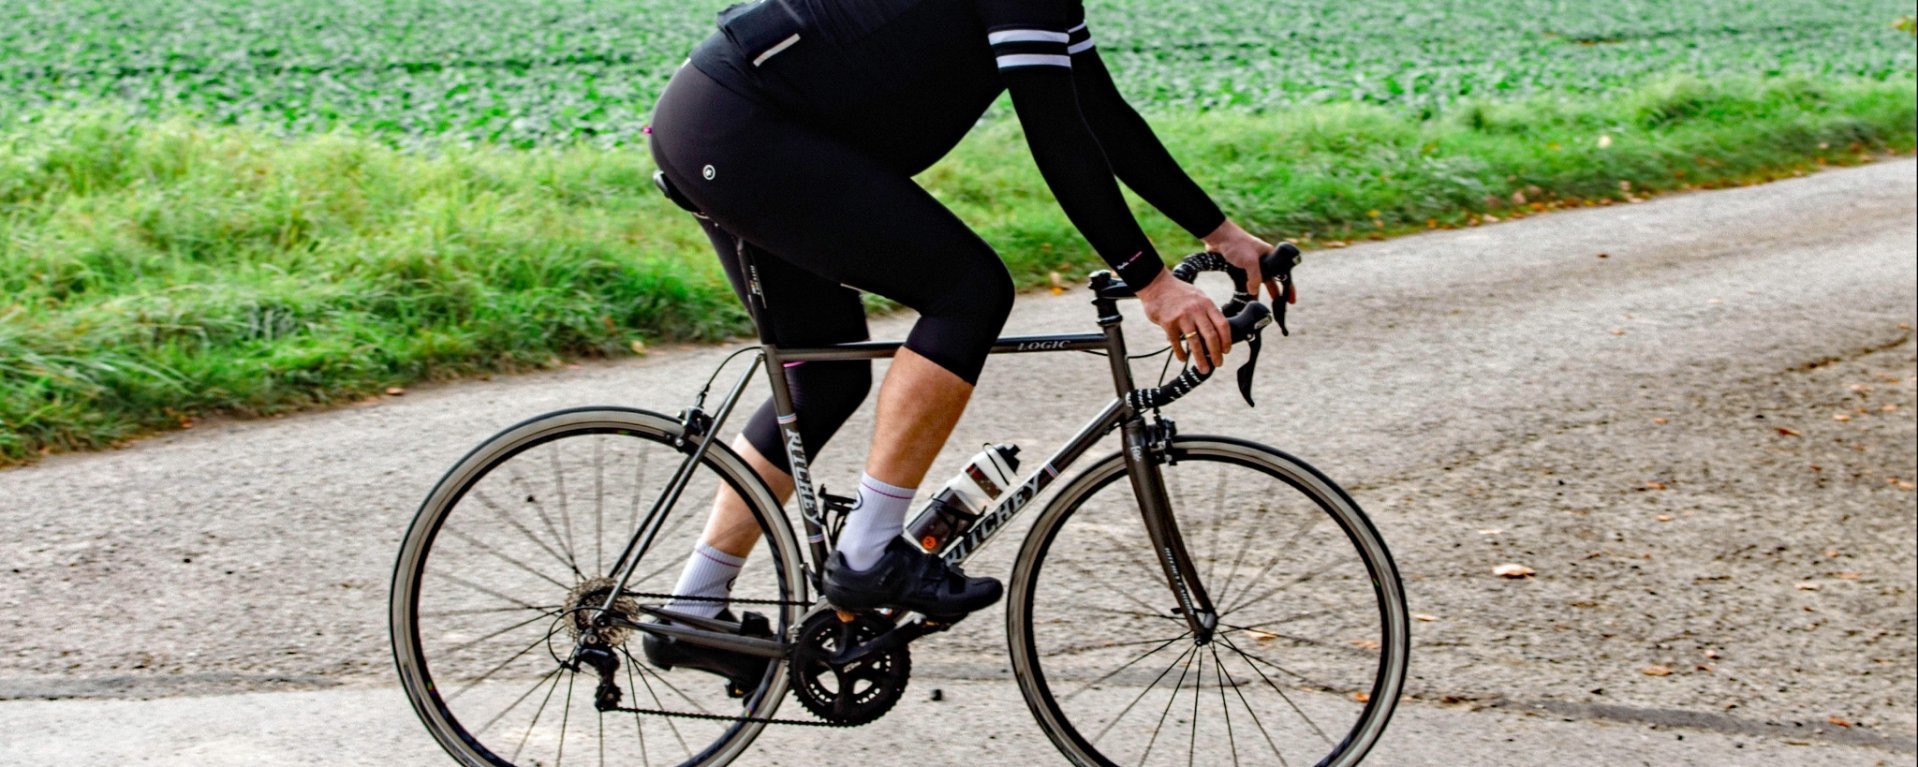 Bib shorts and knee warmers are a great combination for changing weather in spring and fall.